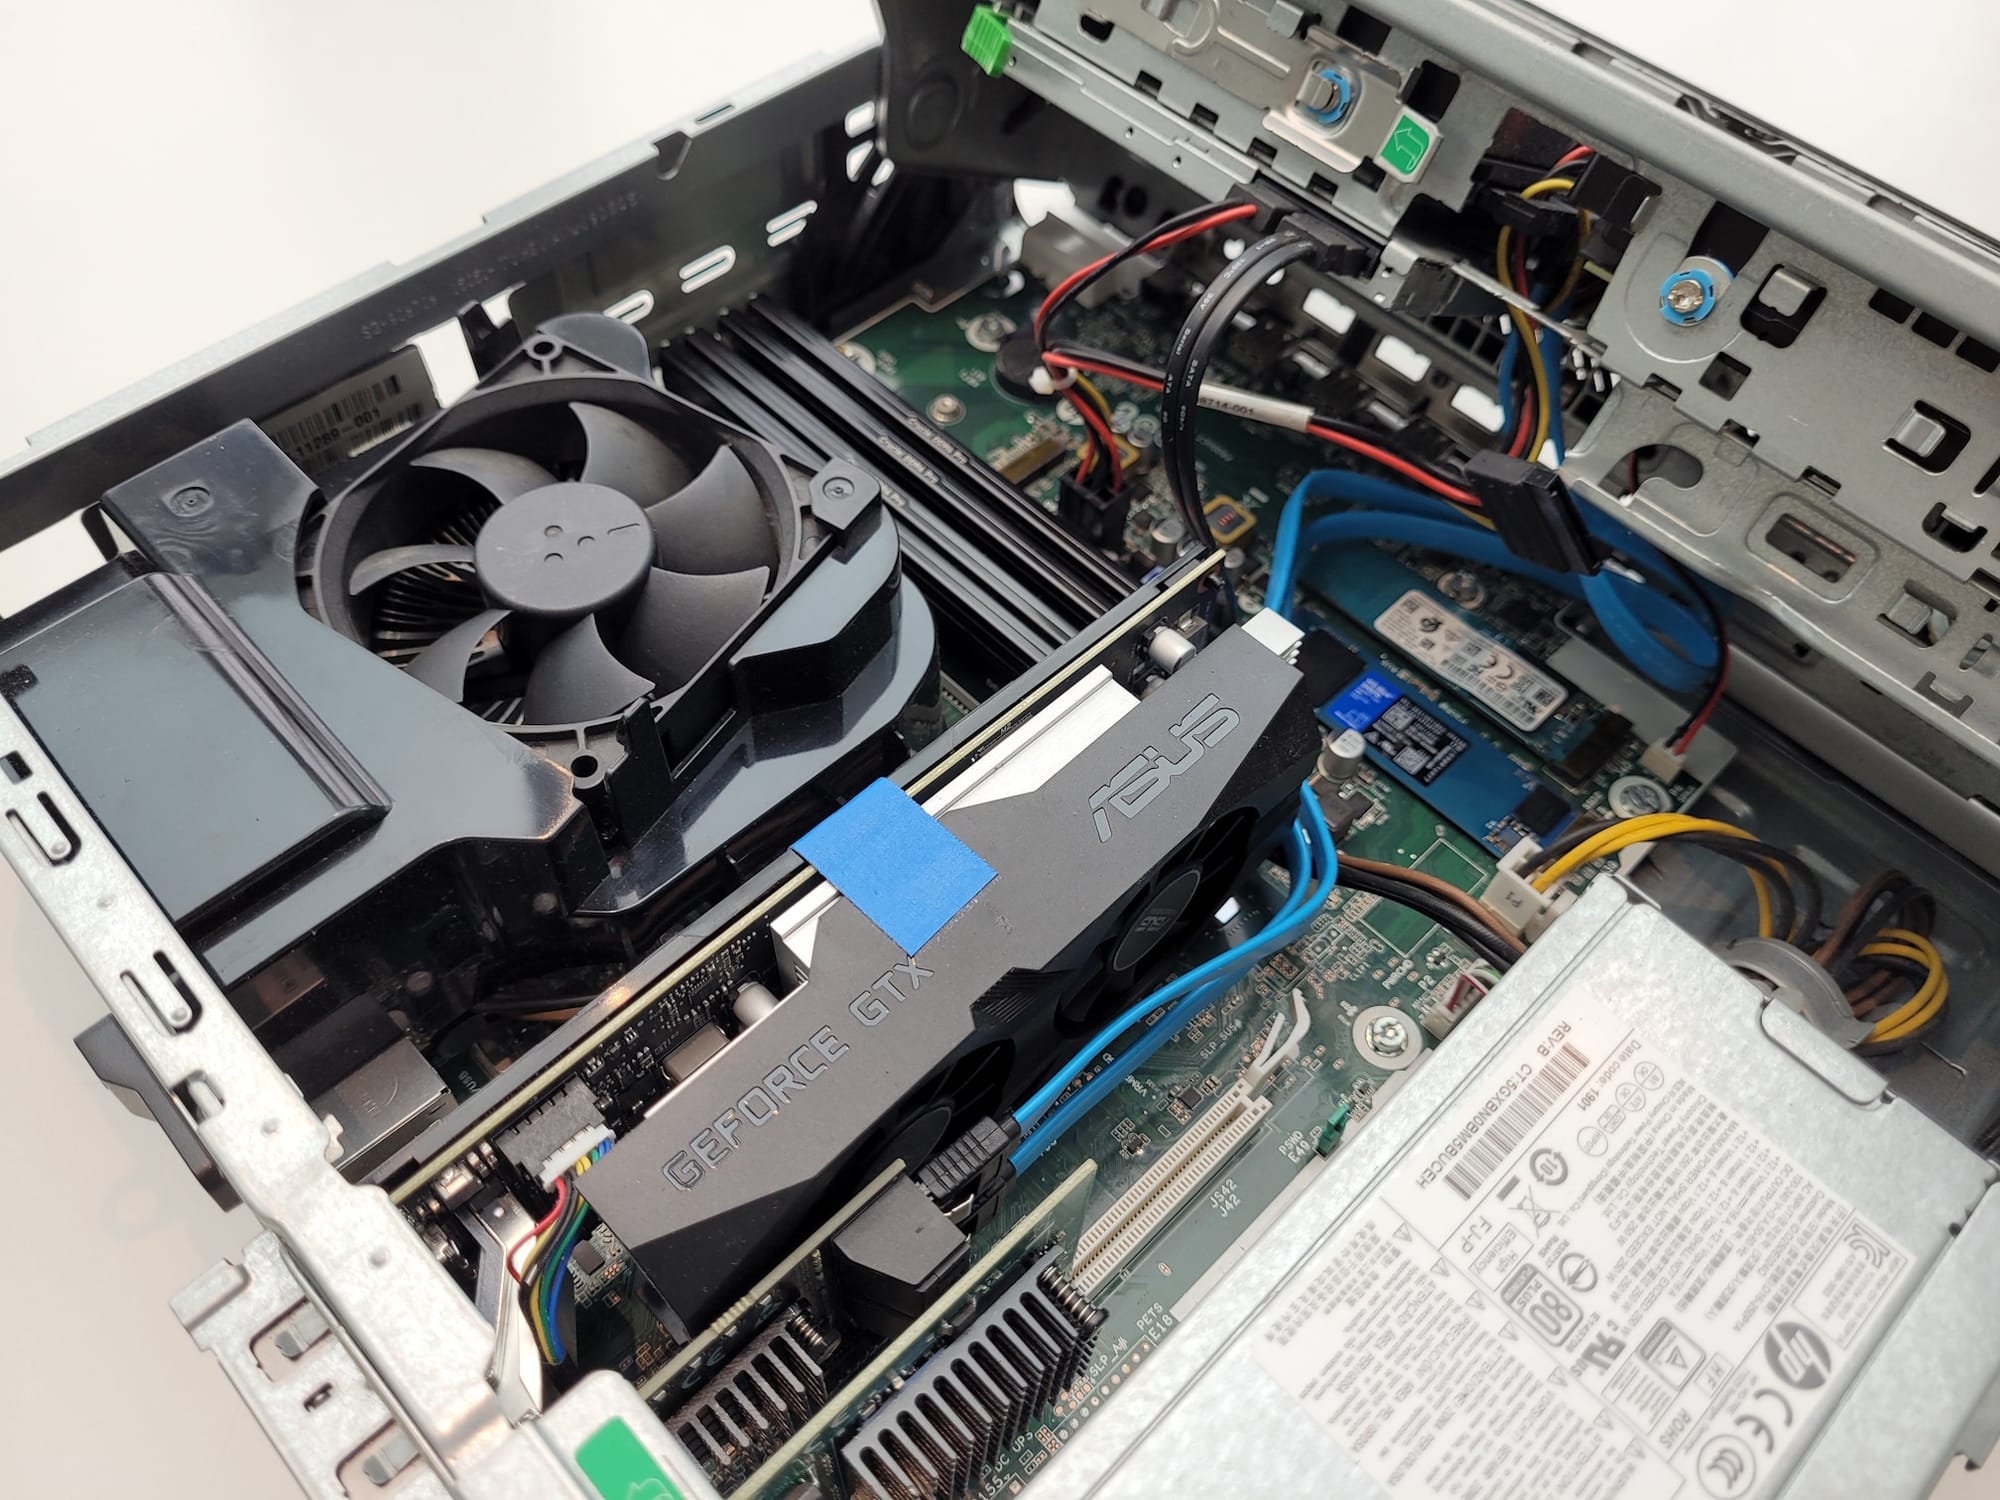 Using an old HP Elitedesk as a home server